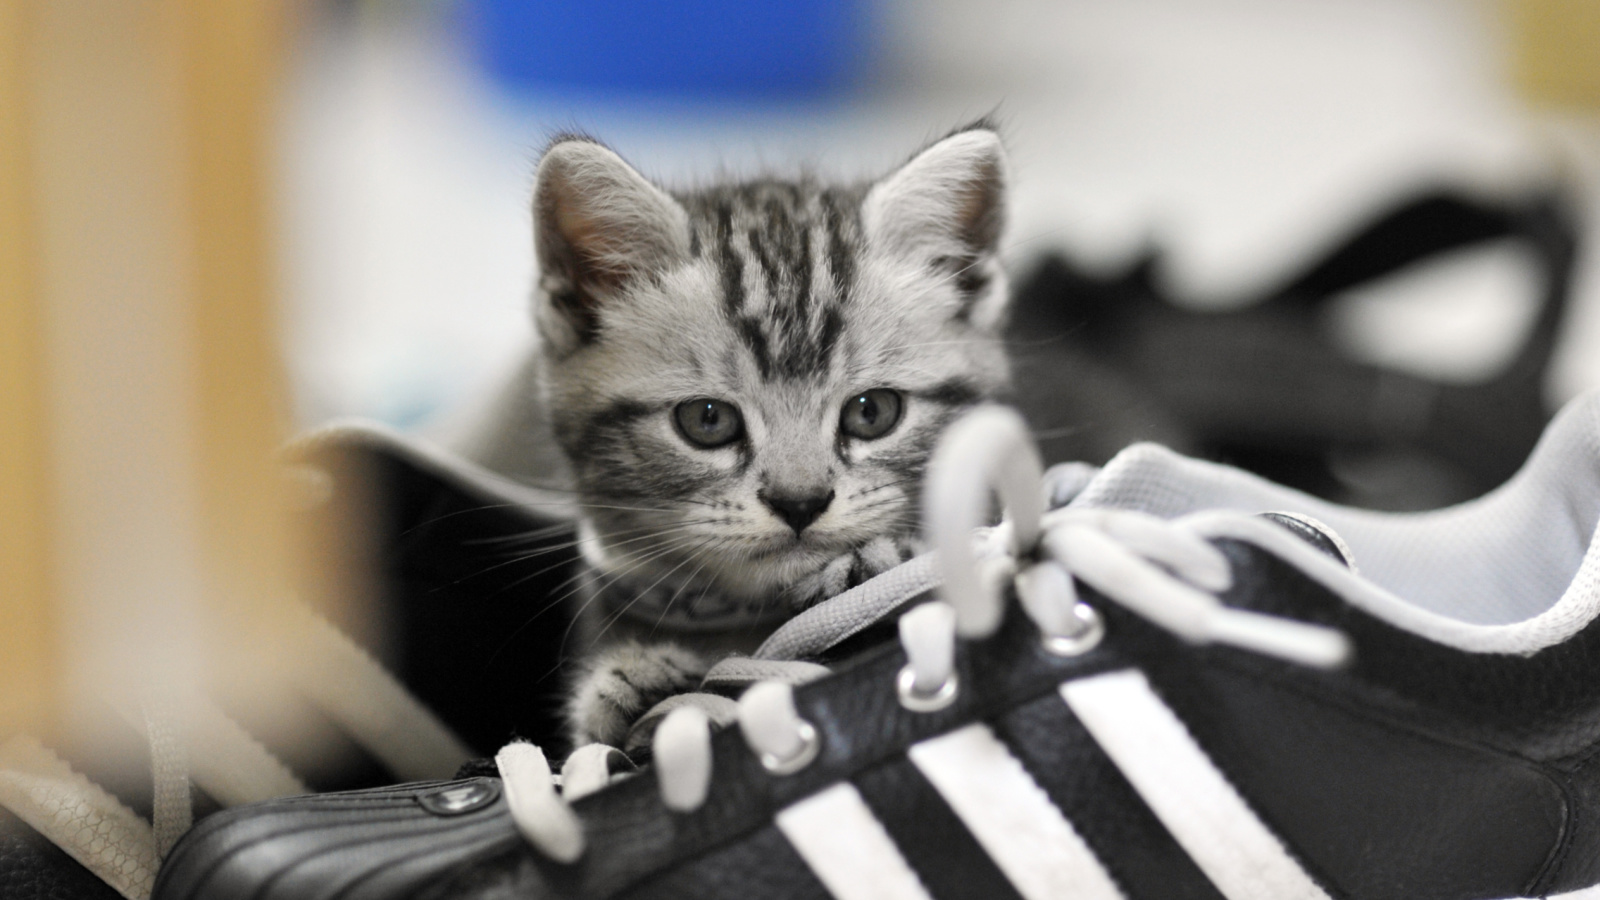 Kitten with shoes wallpaper 1600x900